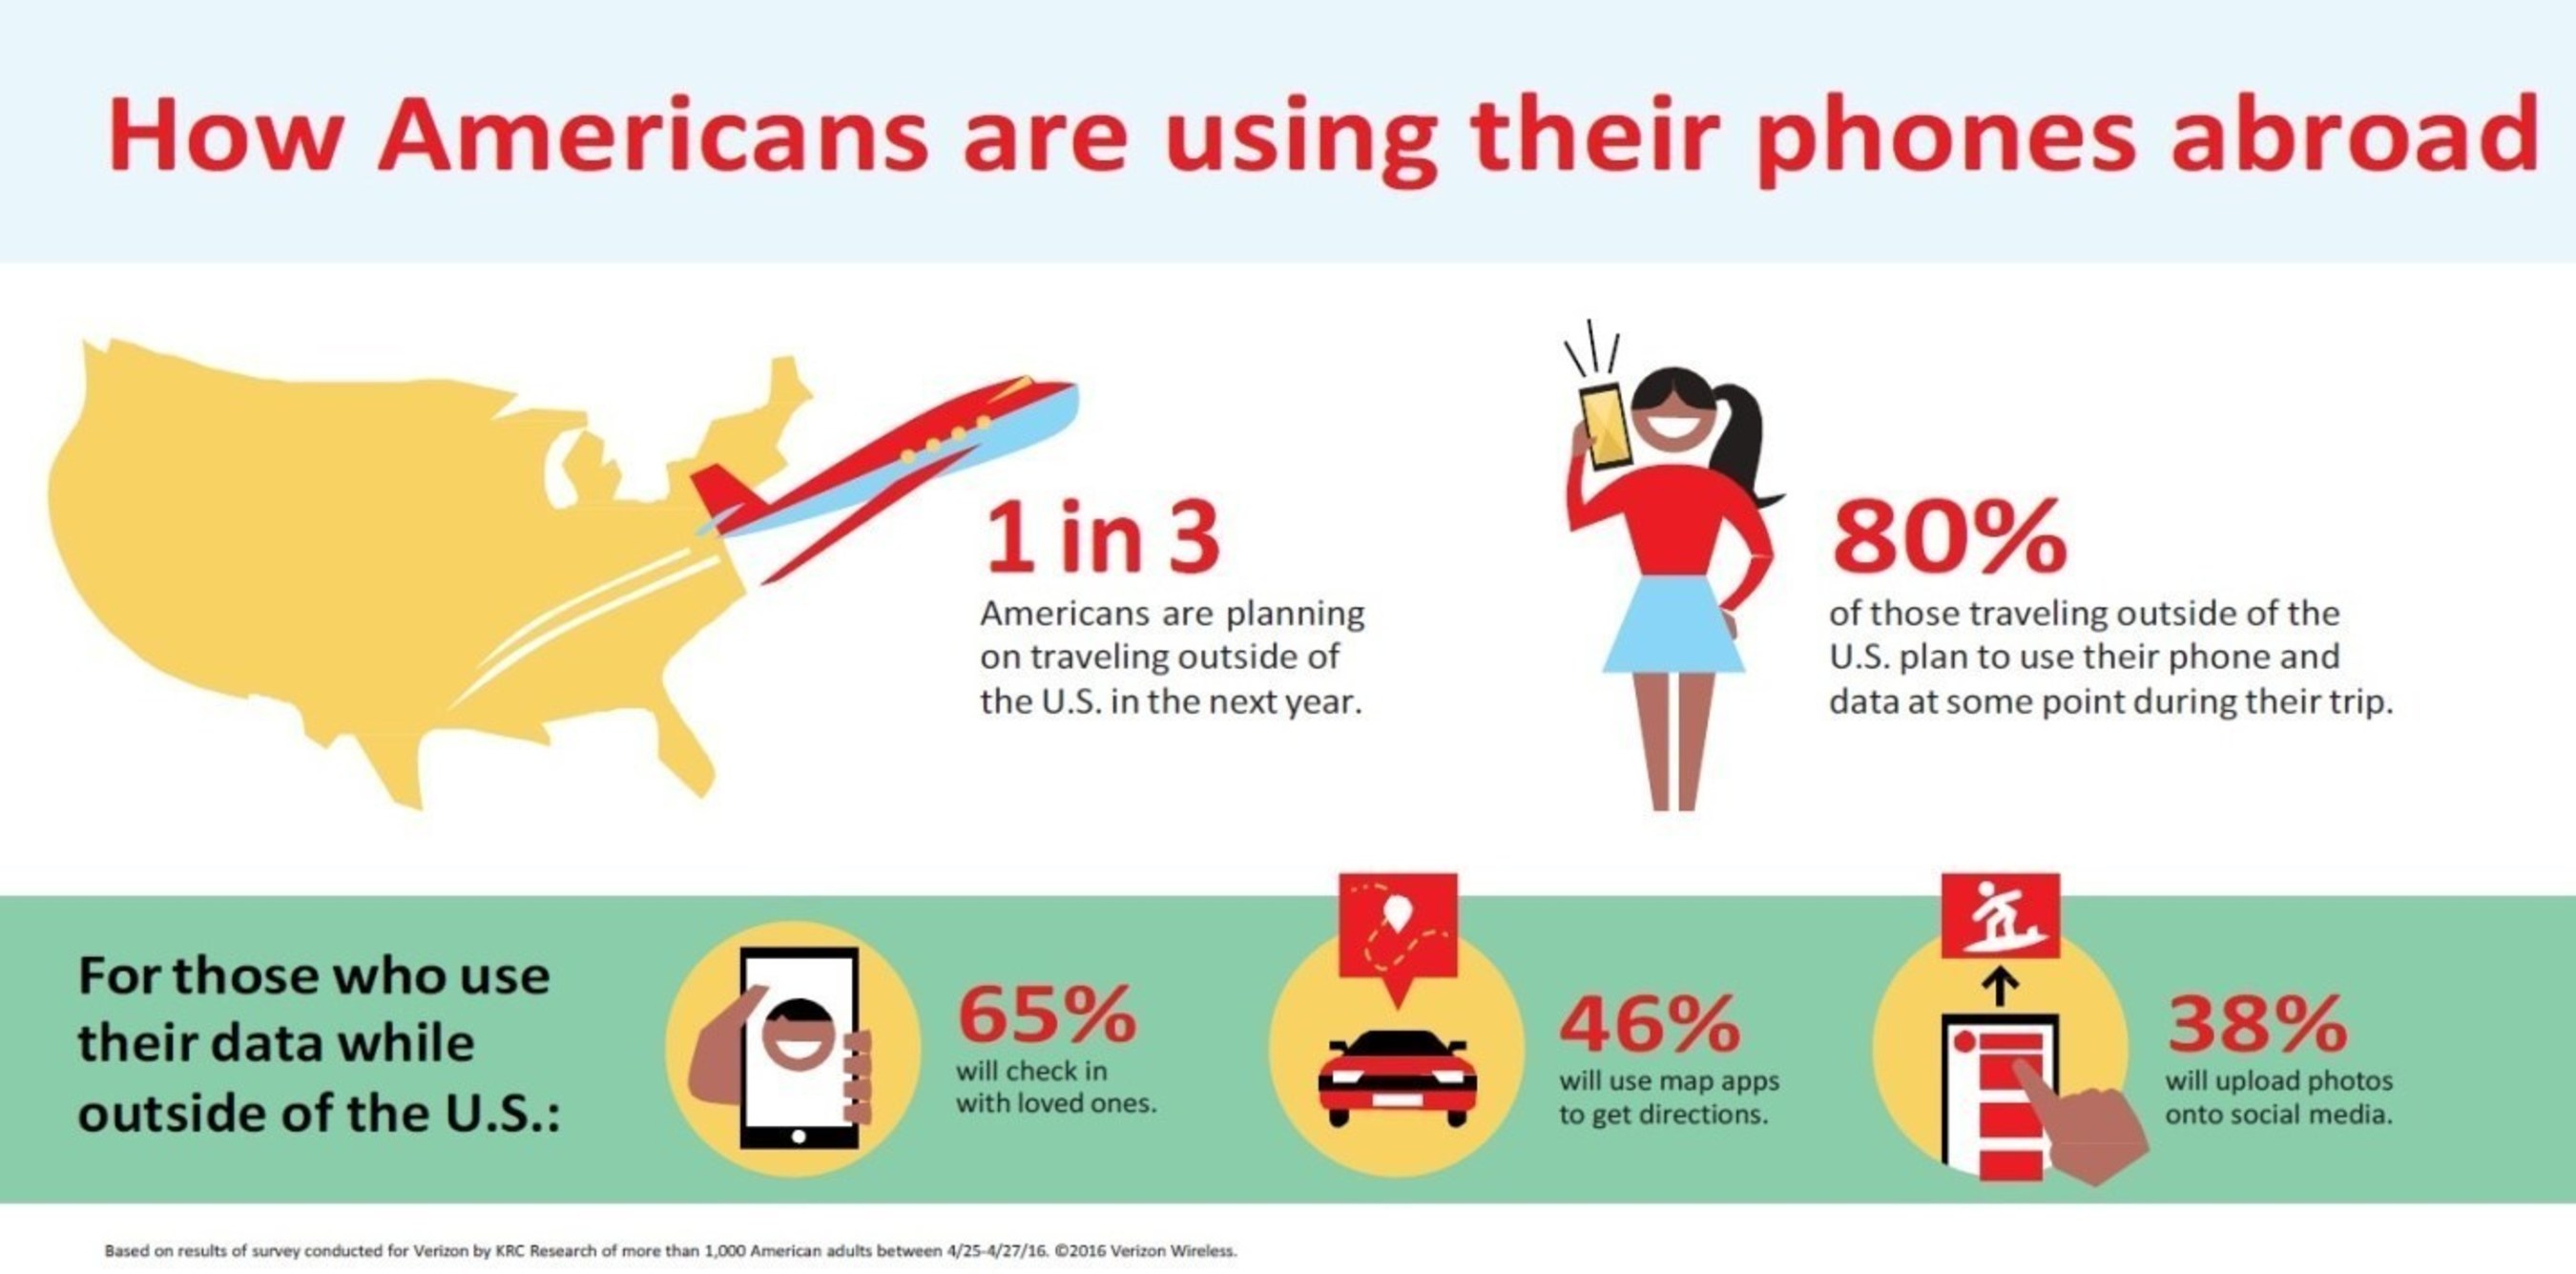 How Americans are using their phones abroad